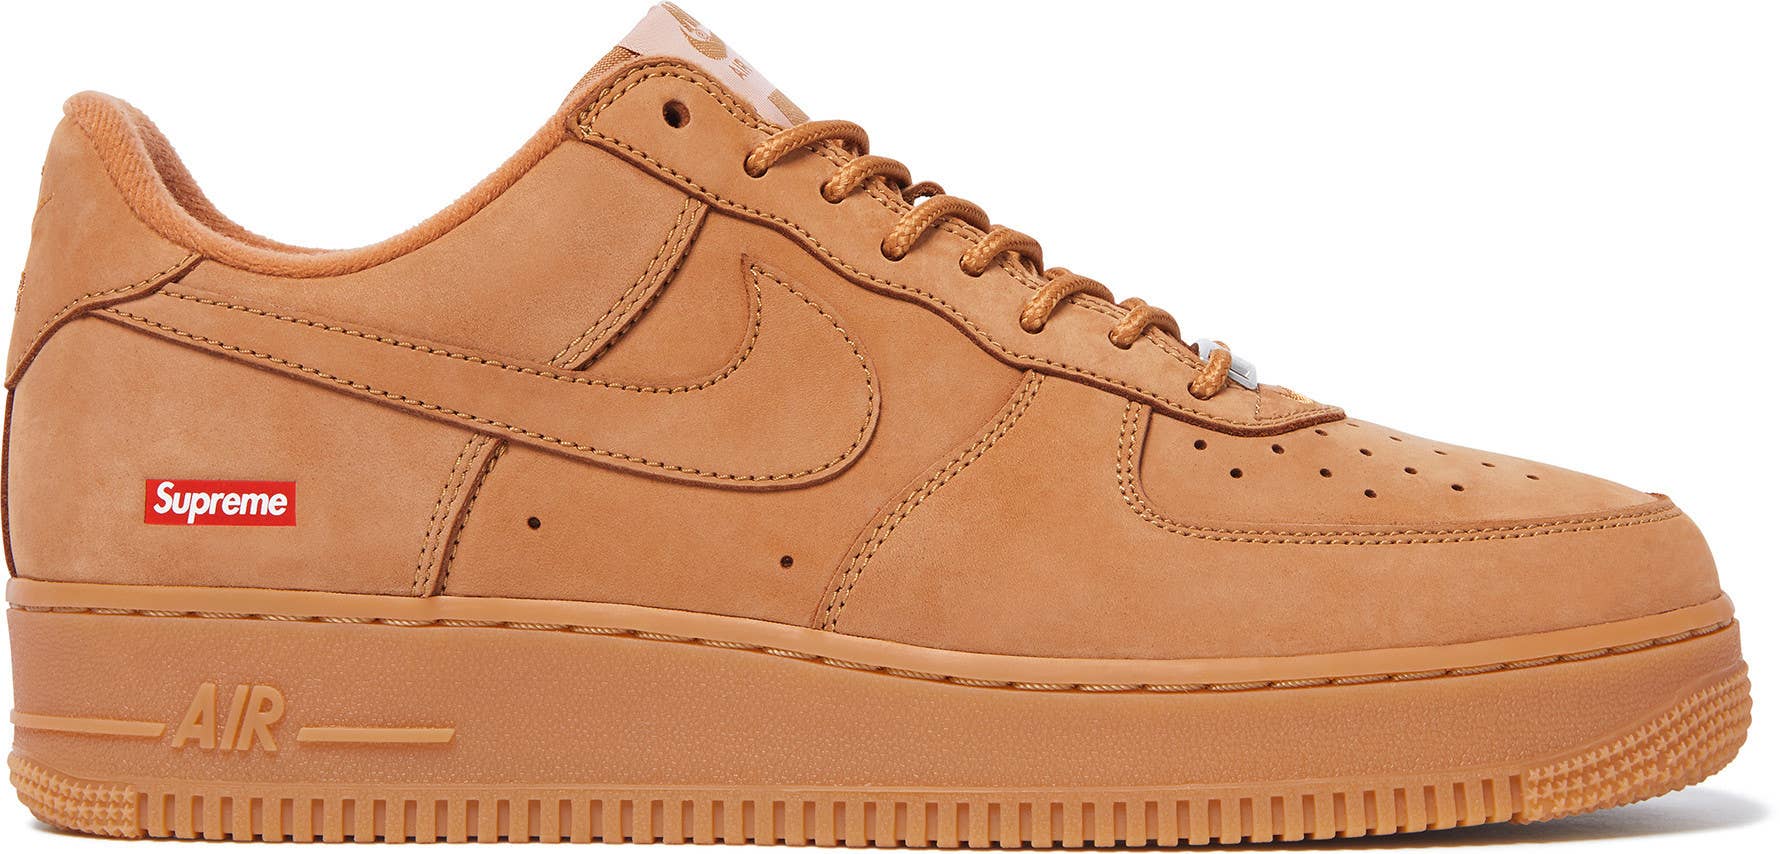 Supreme x Nike Air Force 1 Low 'Flax' Lateral